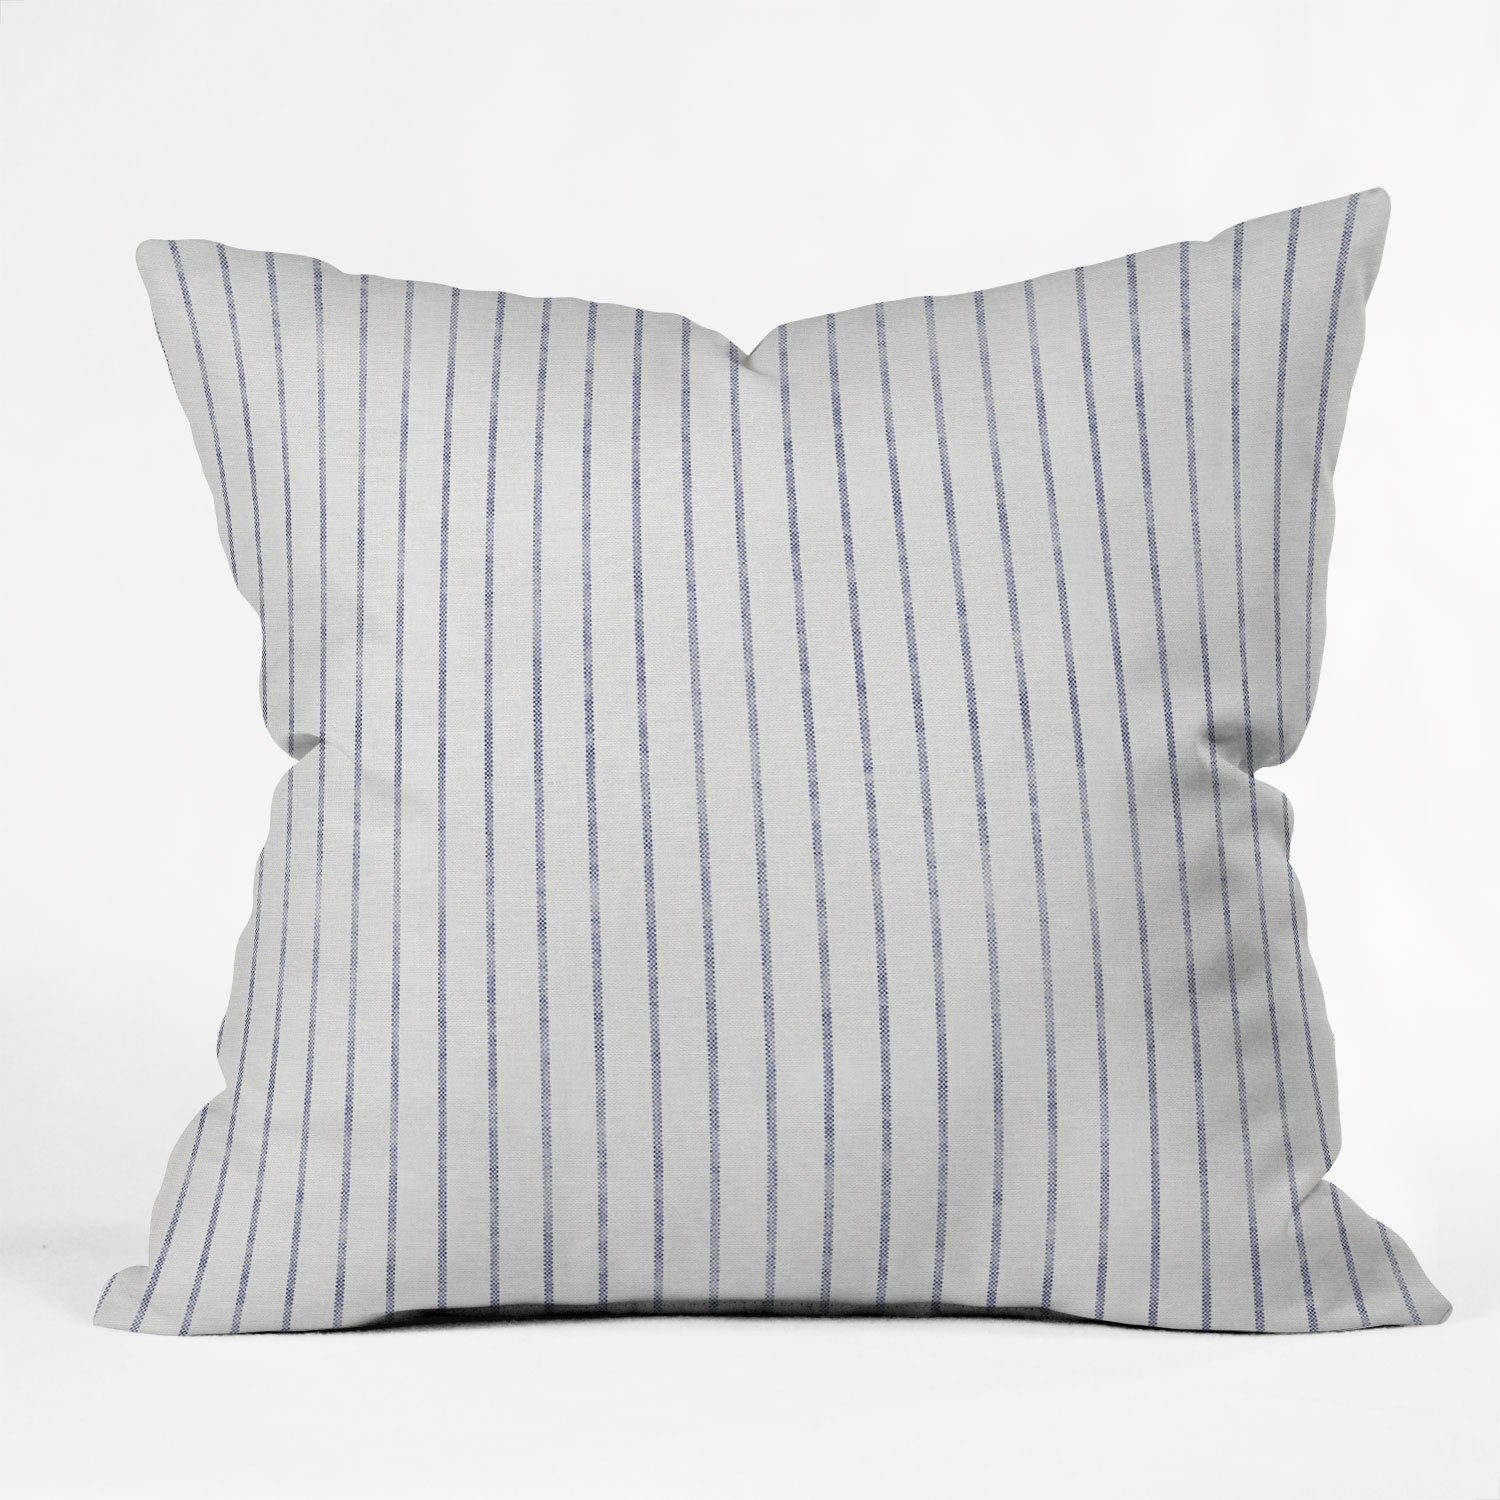 THROW PILLOW AEGEAN WIDE STRIPE  BY HOLLI ZOLLINGER // 20" x 20" // Pillow Cover with Insert - Image 0